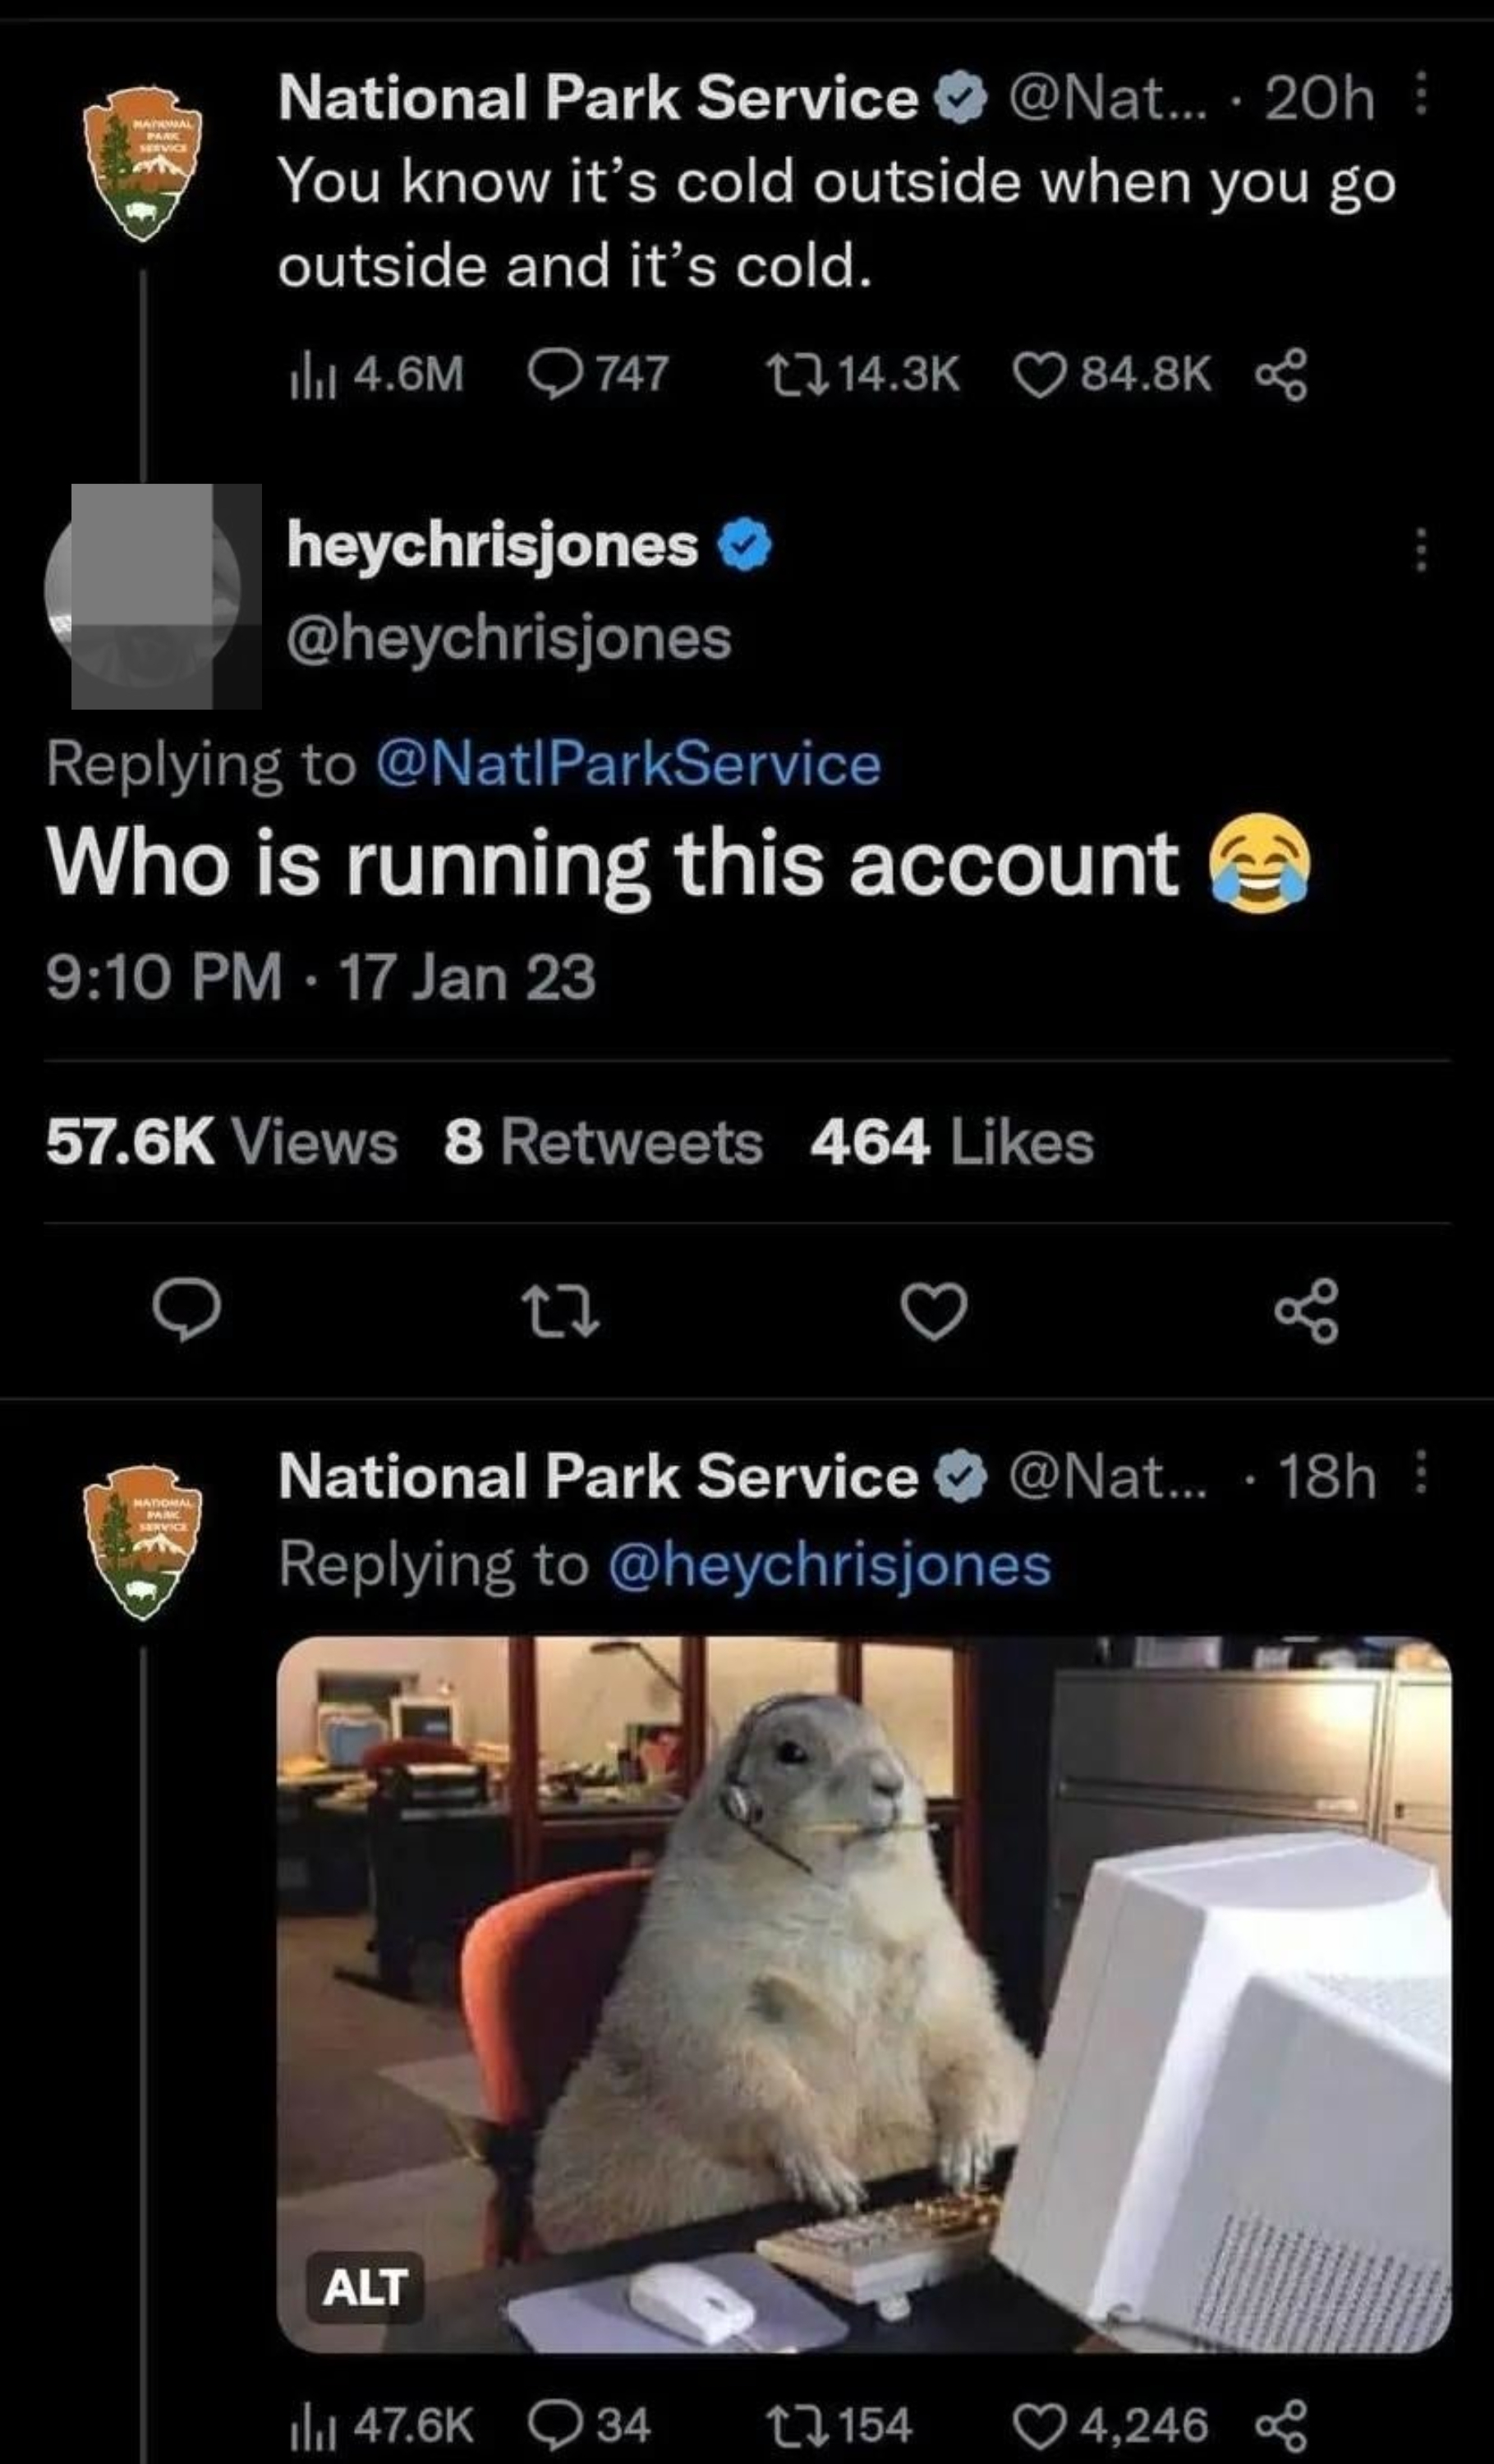 National Park Service posts social media message, &quot;You know it&#x27;s cold outside when you go outside and it&#x27;s cold,&quot; and when someone asks who&#x27;s running the account, the NPS postsa photo of a large groundhog at the computer and wearing headphones